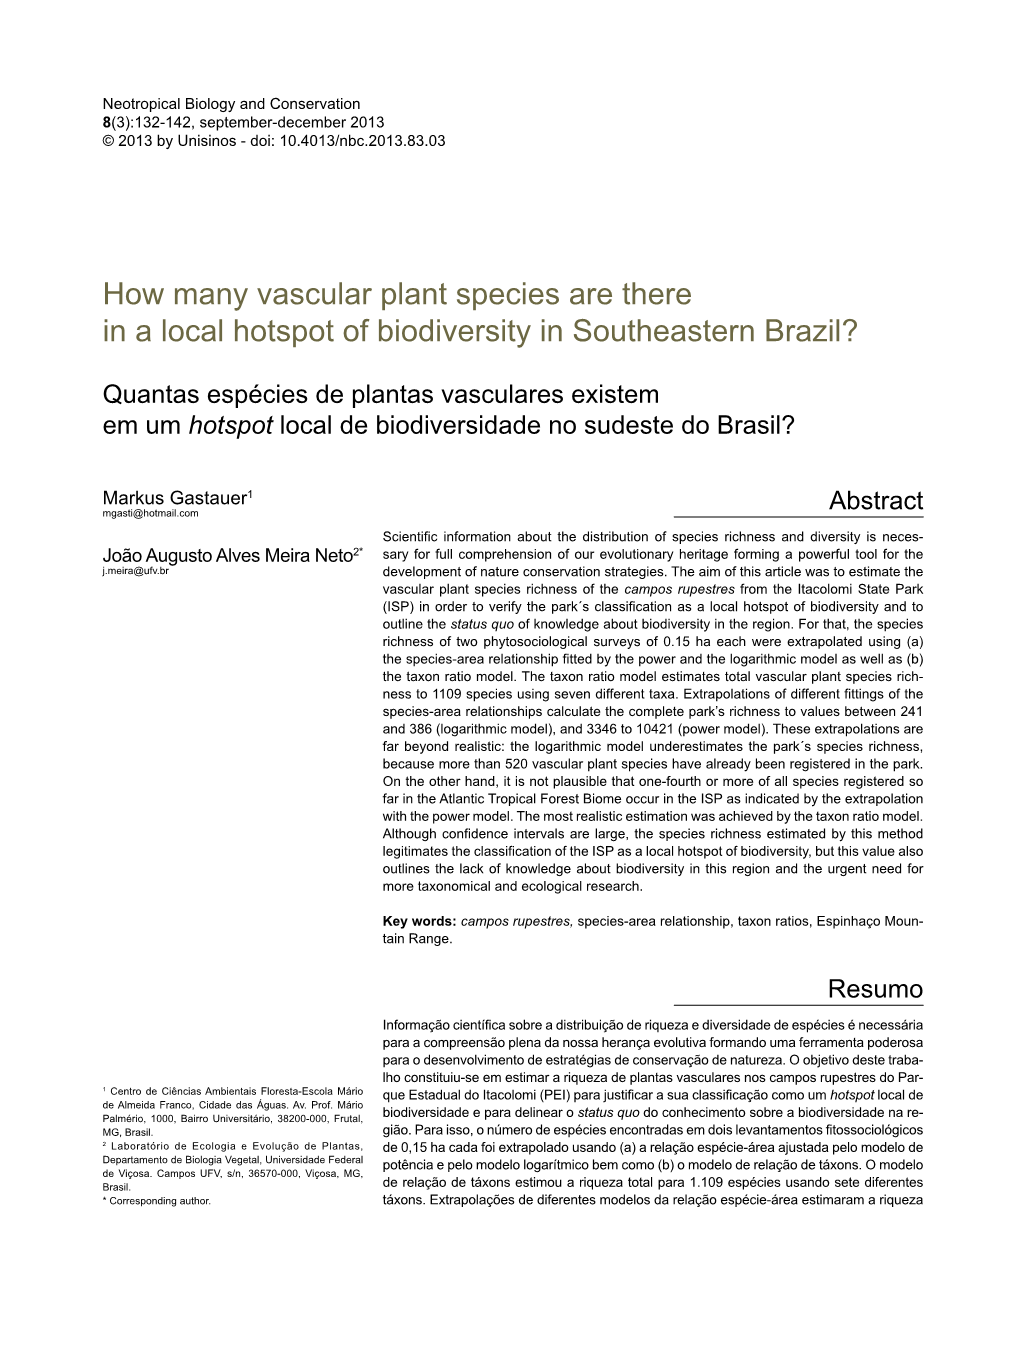 How Many Vascular Plant Species Are There in a Local Hotspot of Biodiversity in Southeastern Brazil?